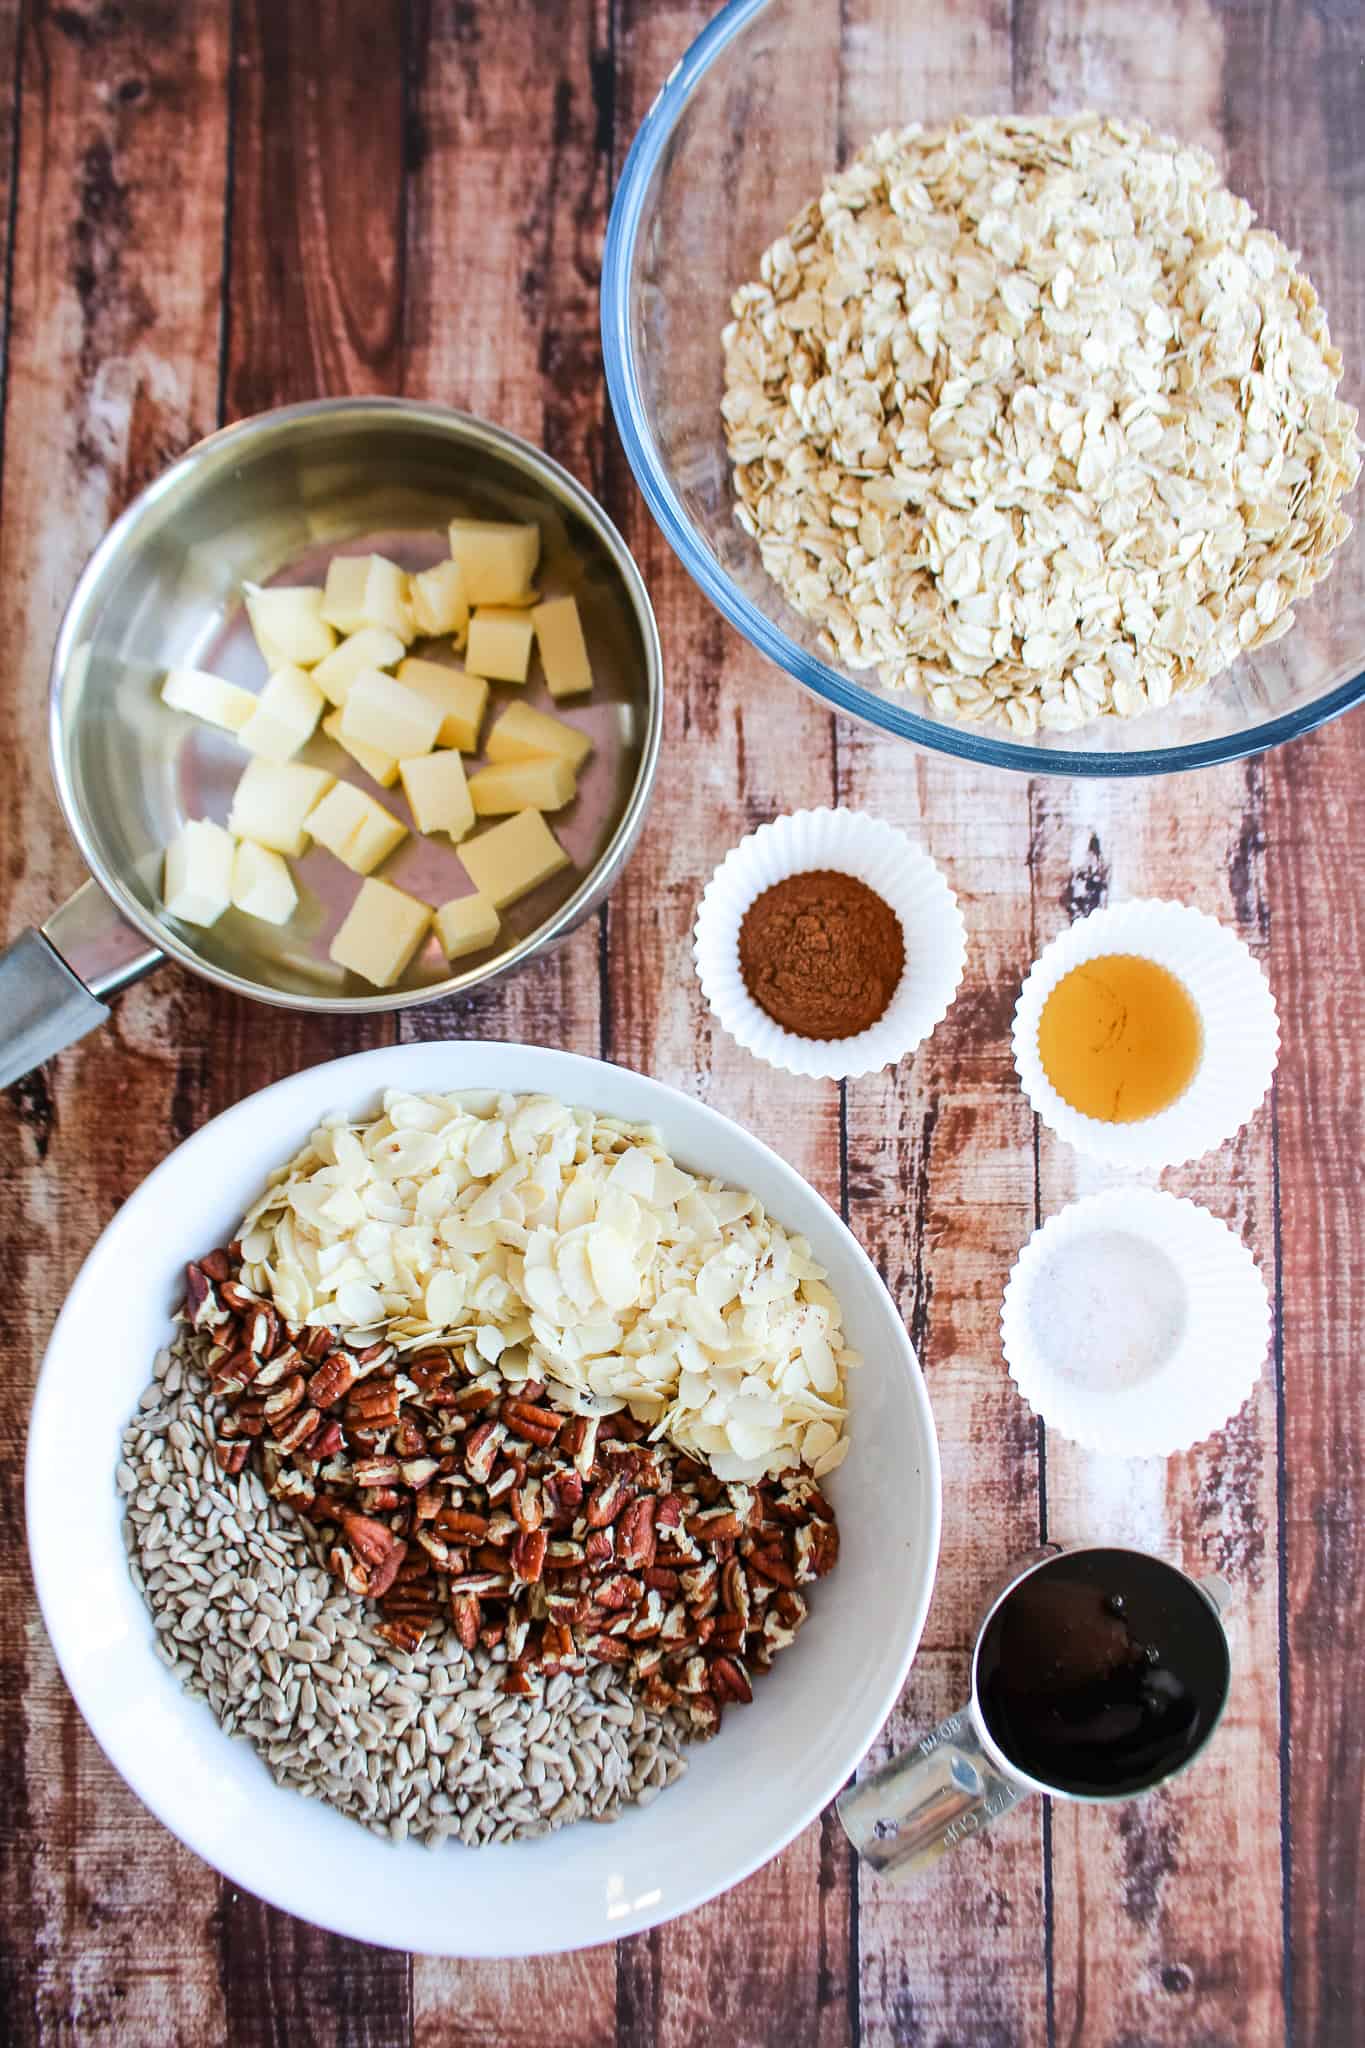 several bowls of best homemade granola ingredients including oats, butter, spices, and various nuts and seeds